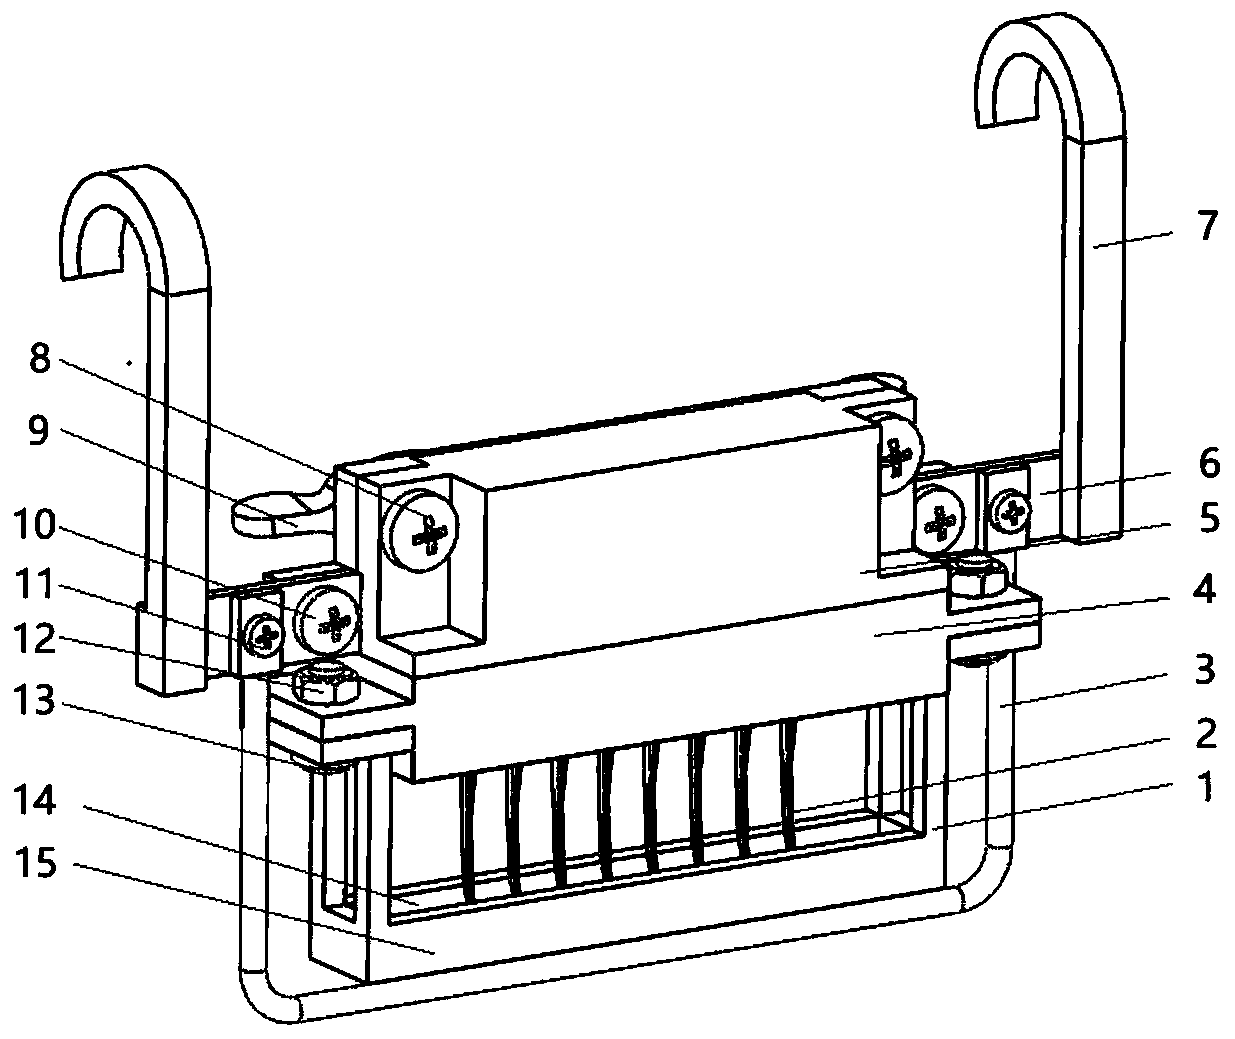 An electroplating jig for holding slotted needles